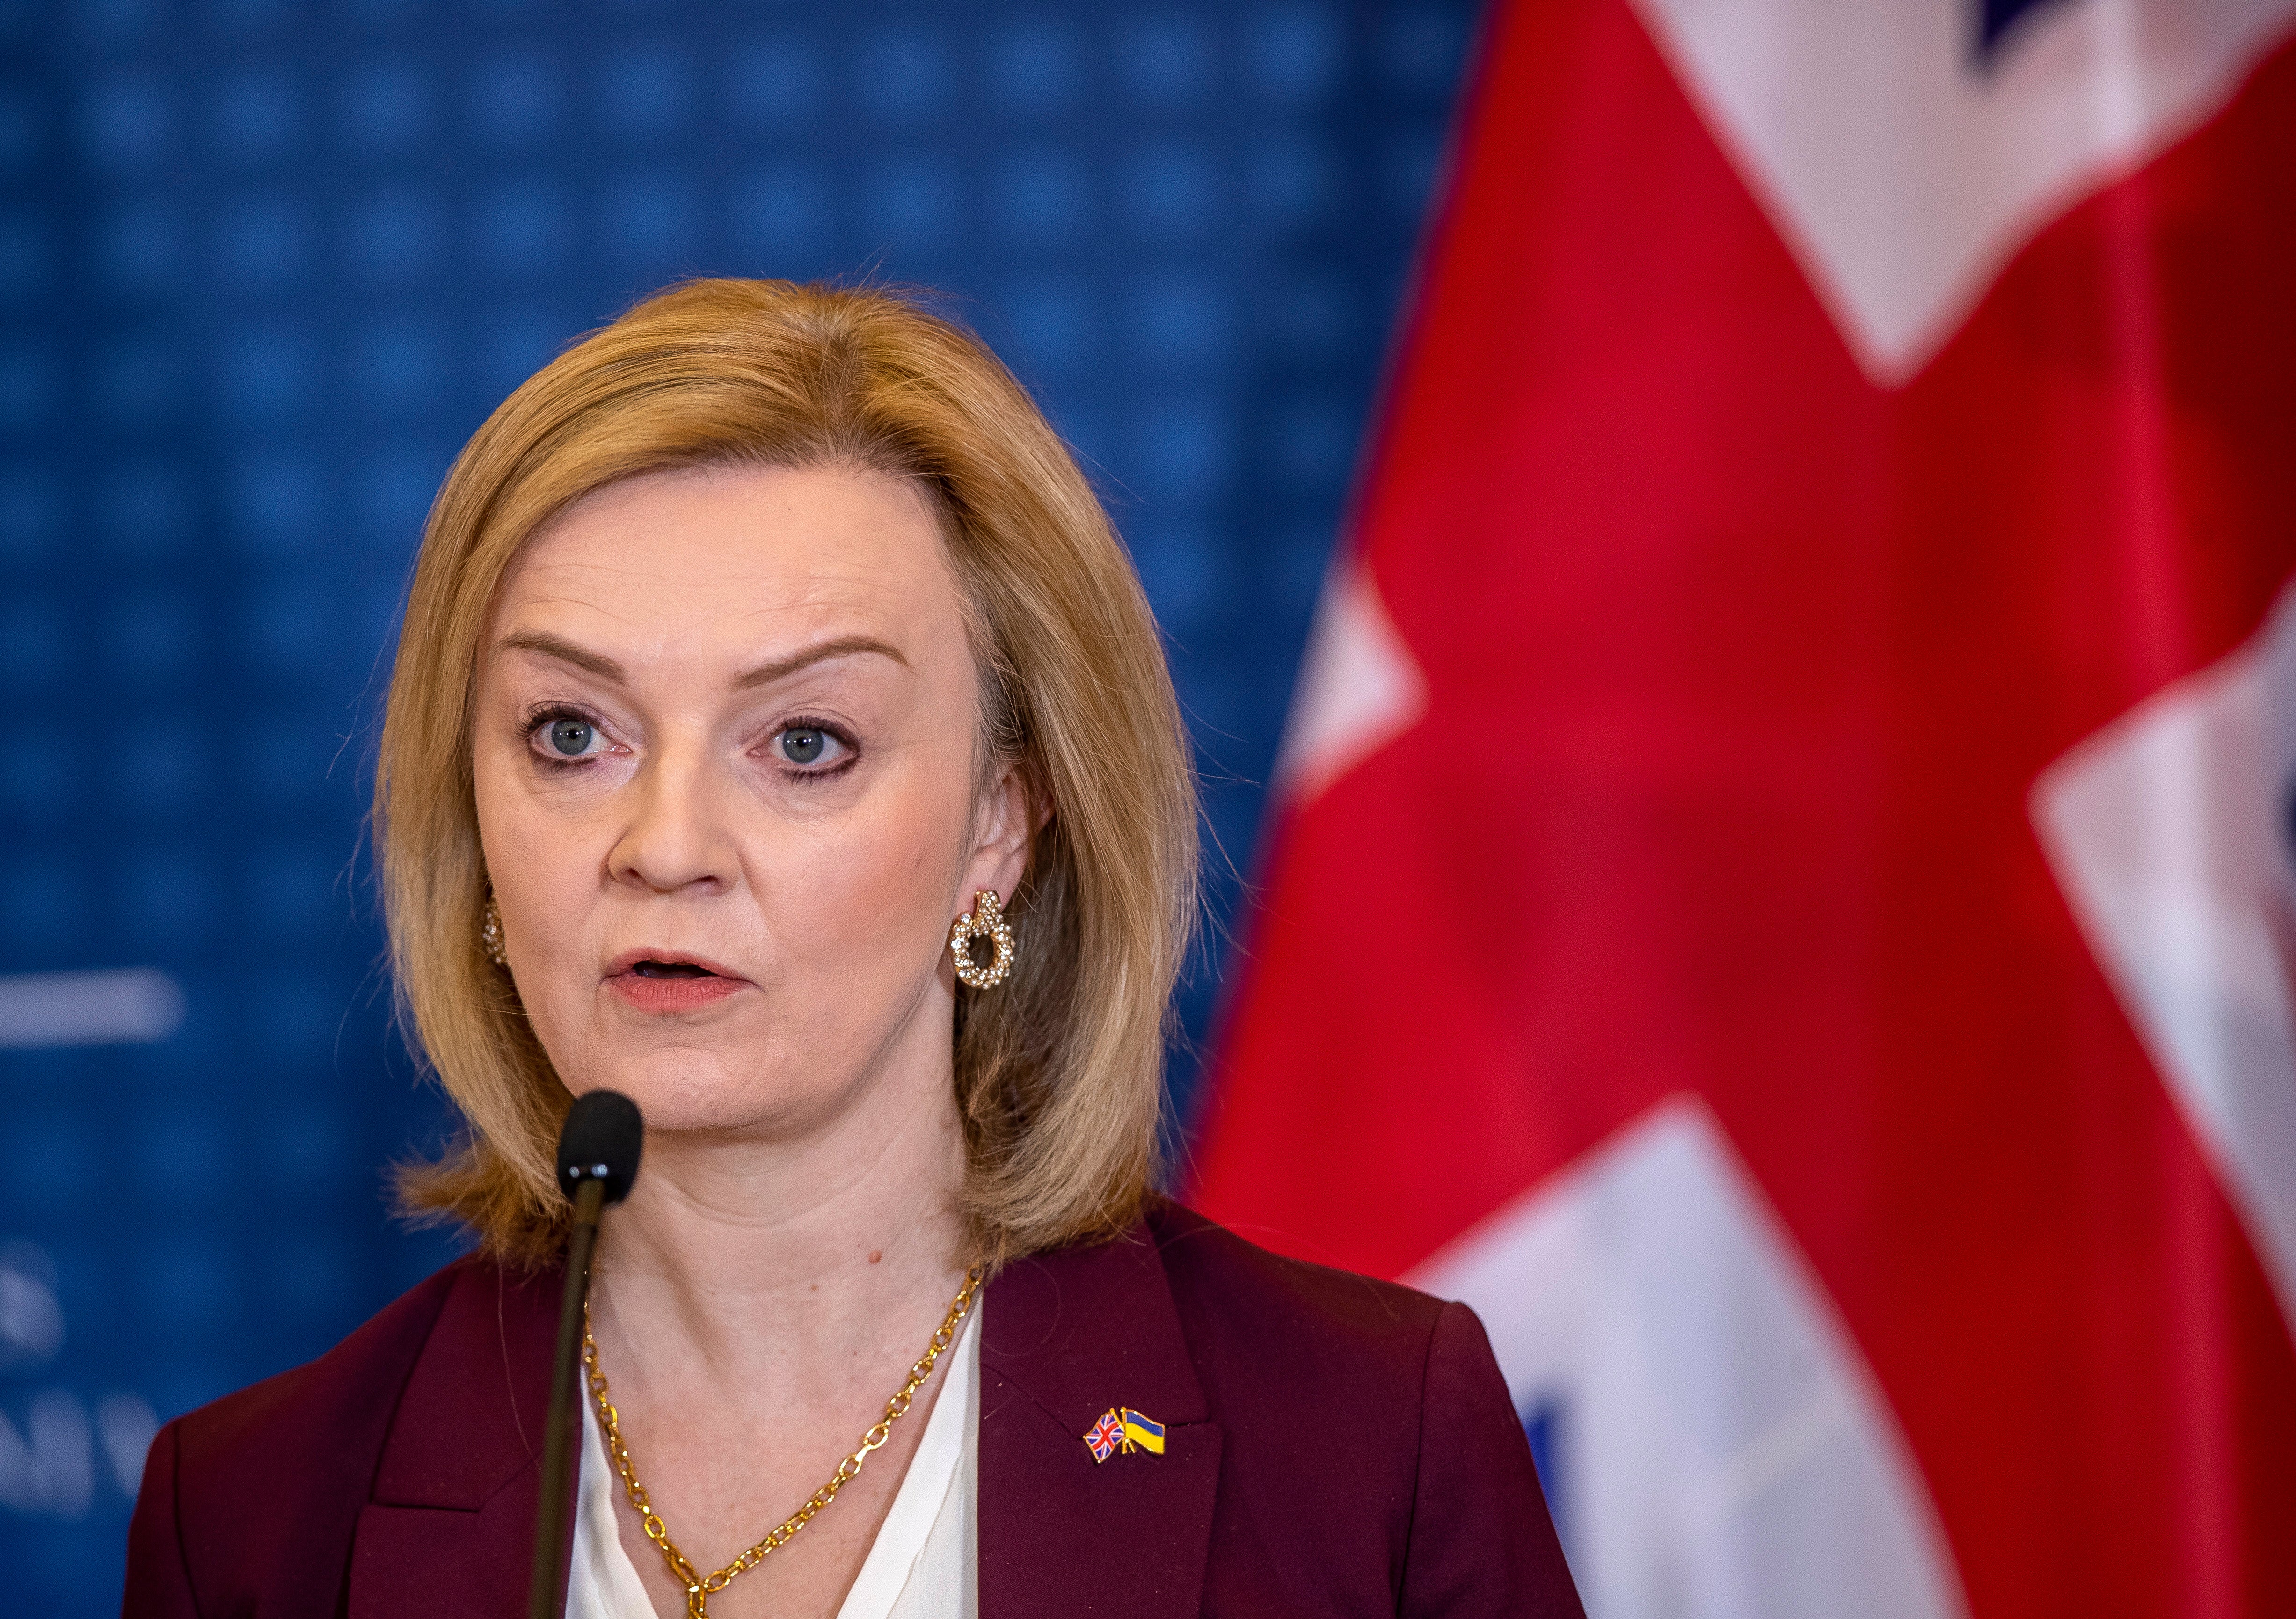 Liz Truss’s Foreign Office is pushing through sanctions measures